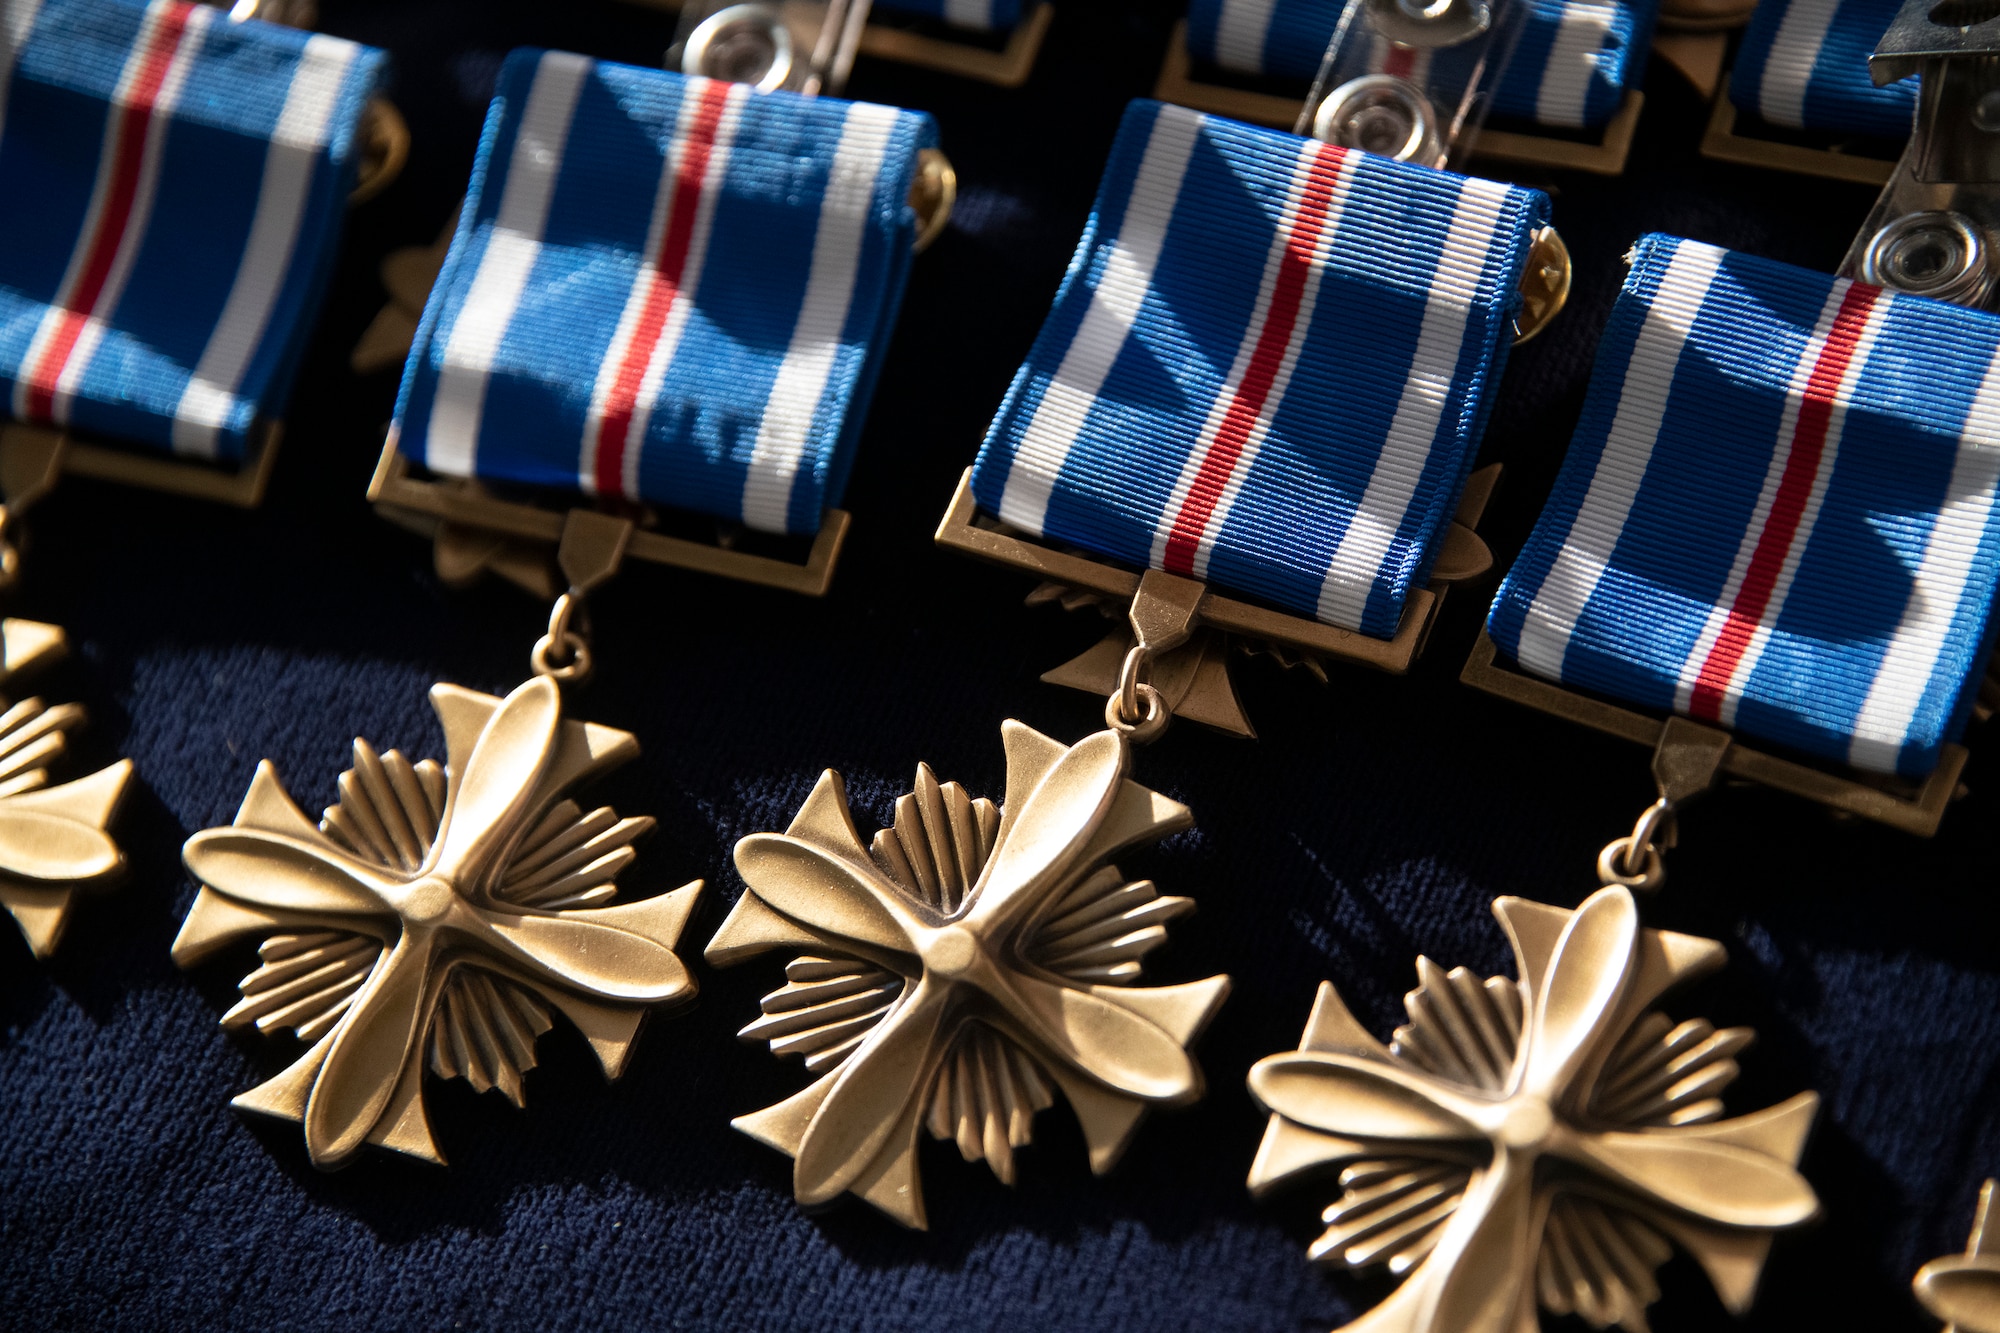 Military medals on display.